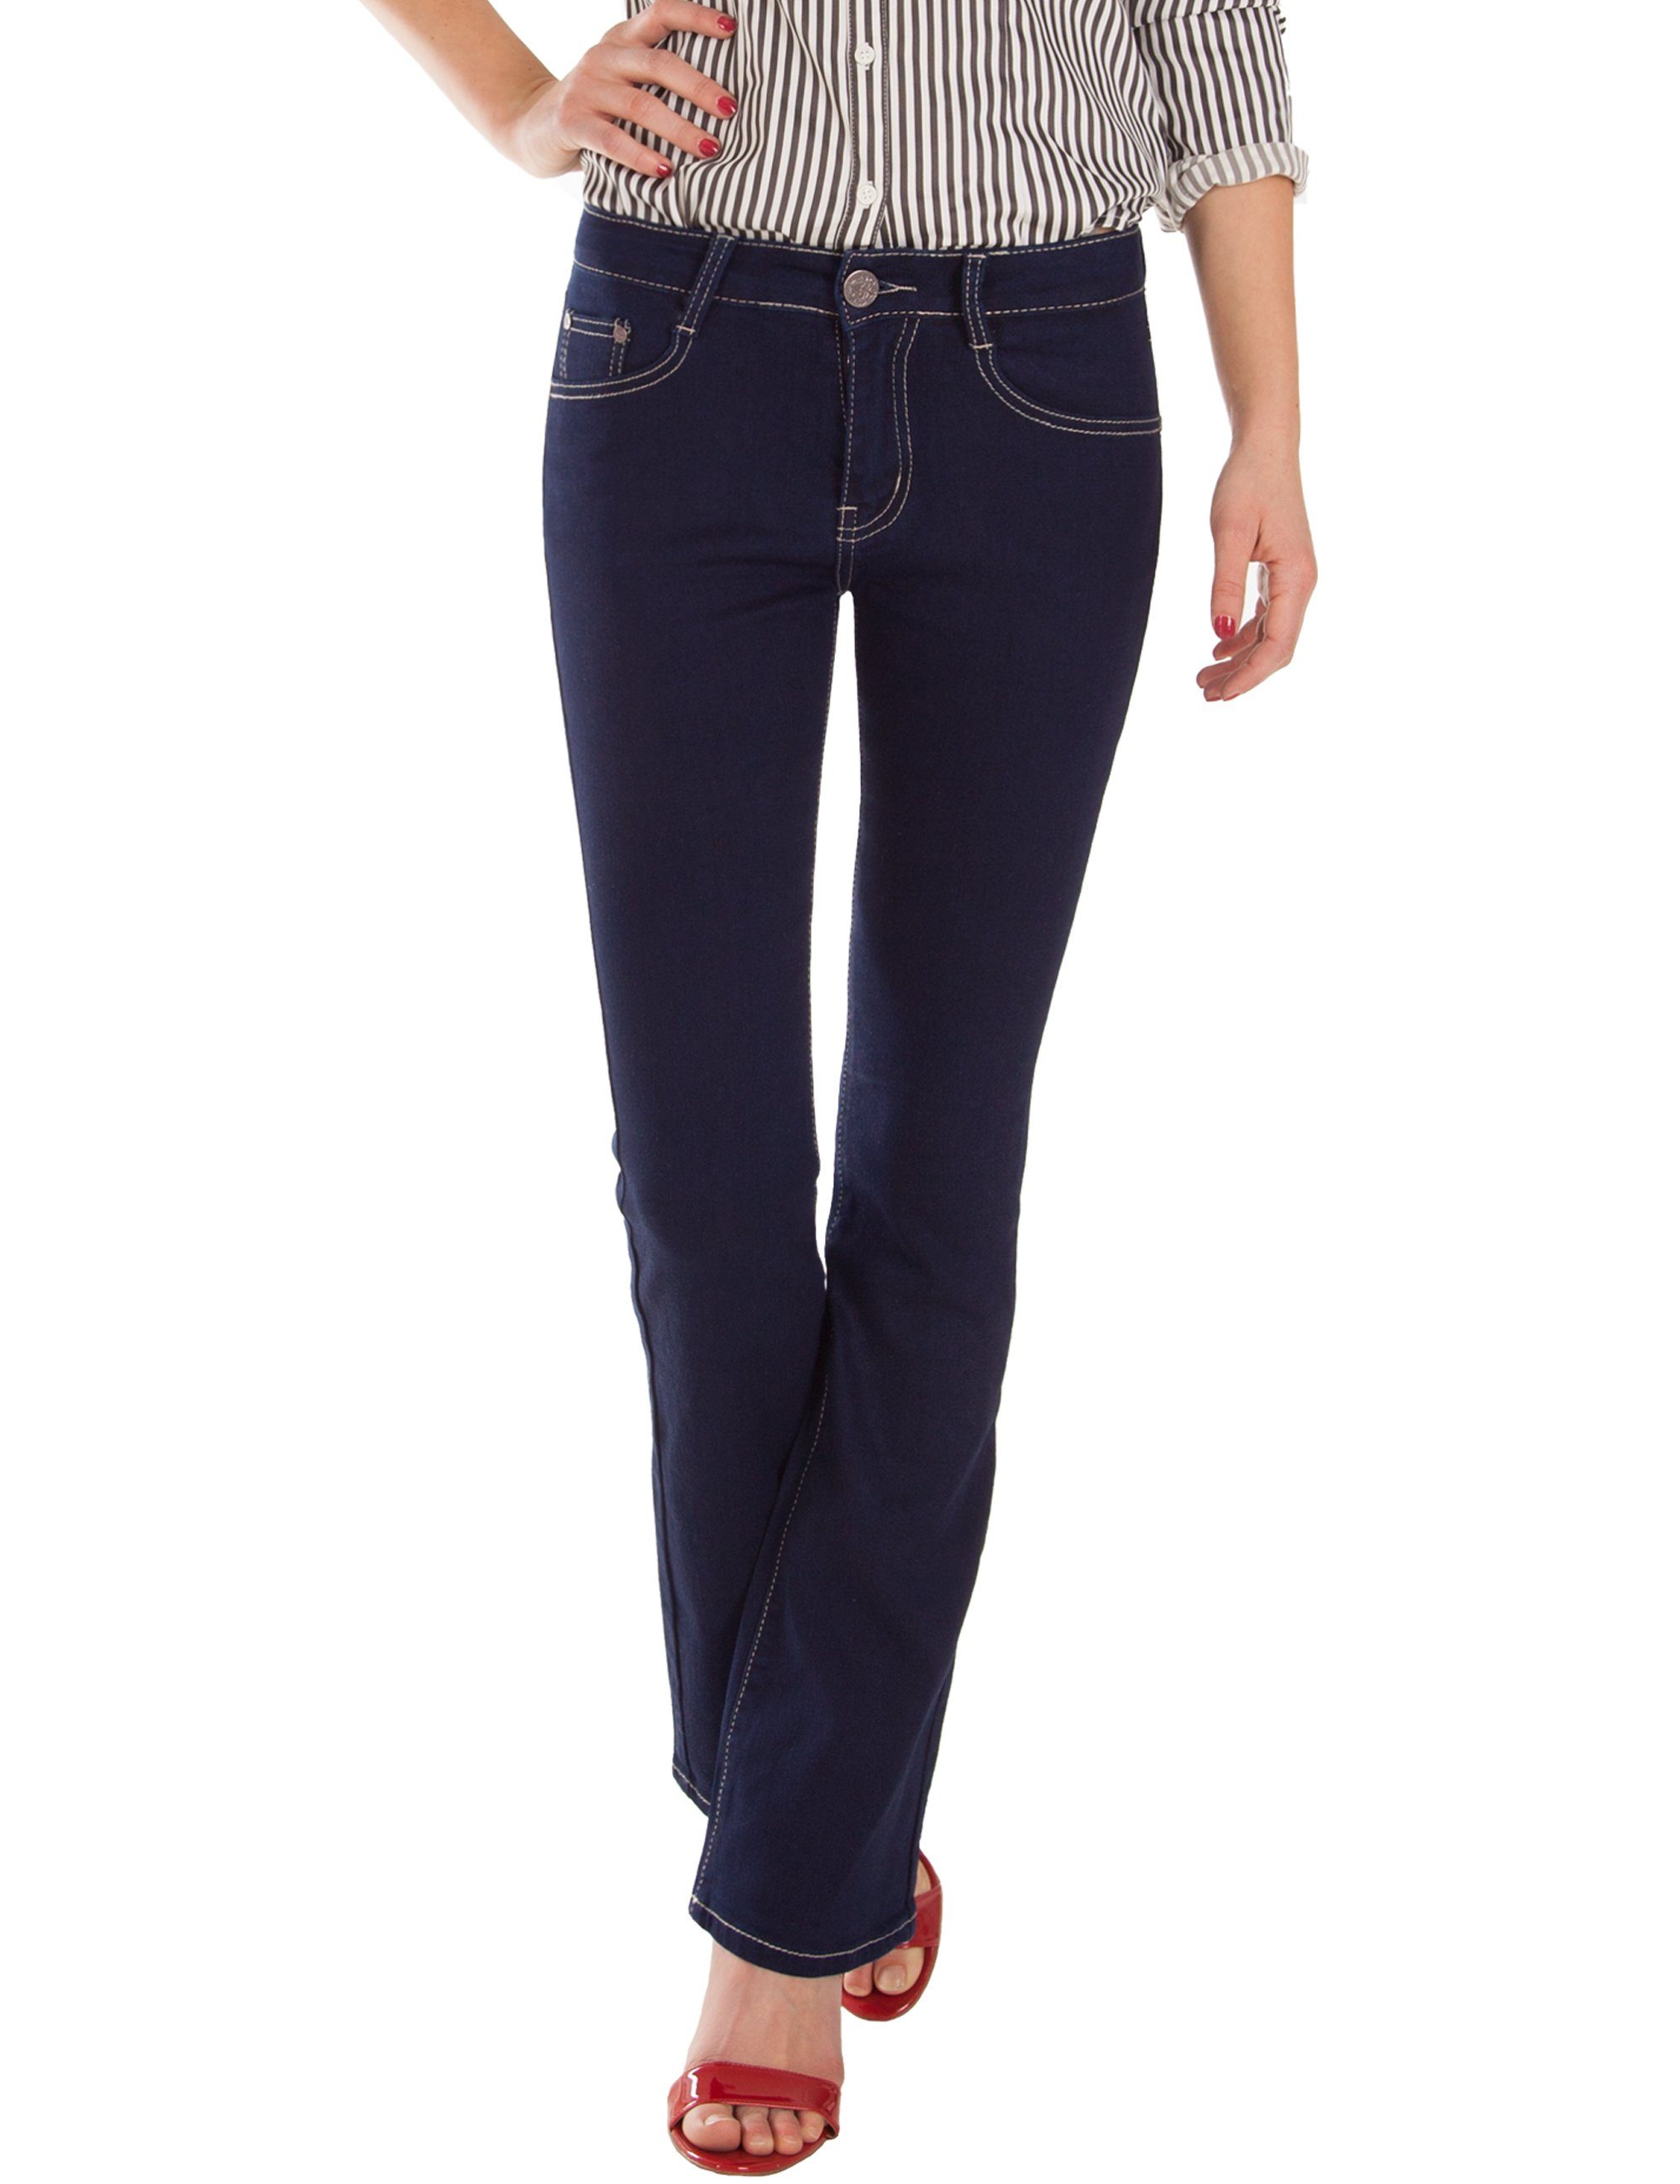 Normal 5-Pocket-Style, Waist Blau Stretch, Bootcut-Jeans Fraternel